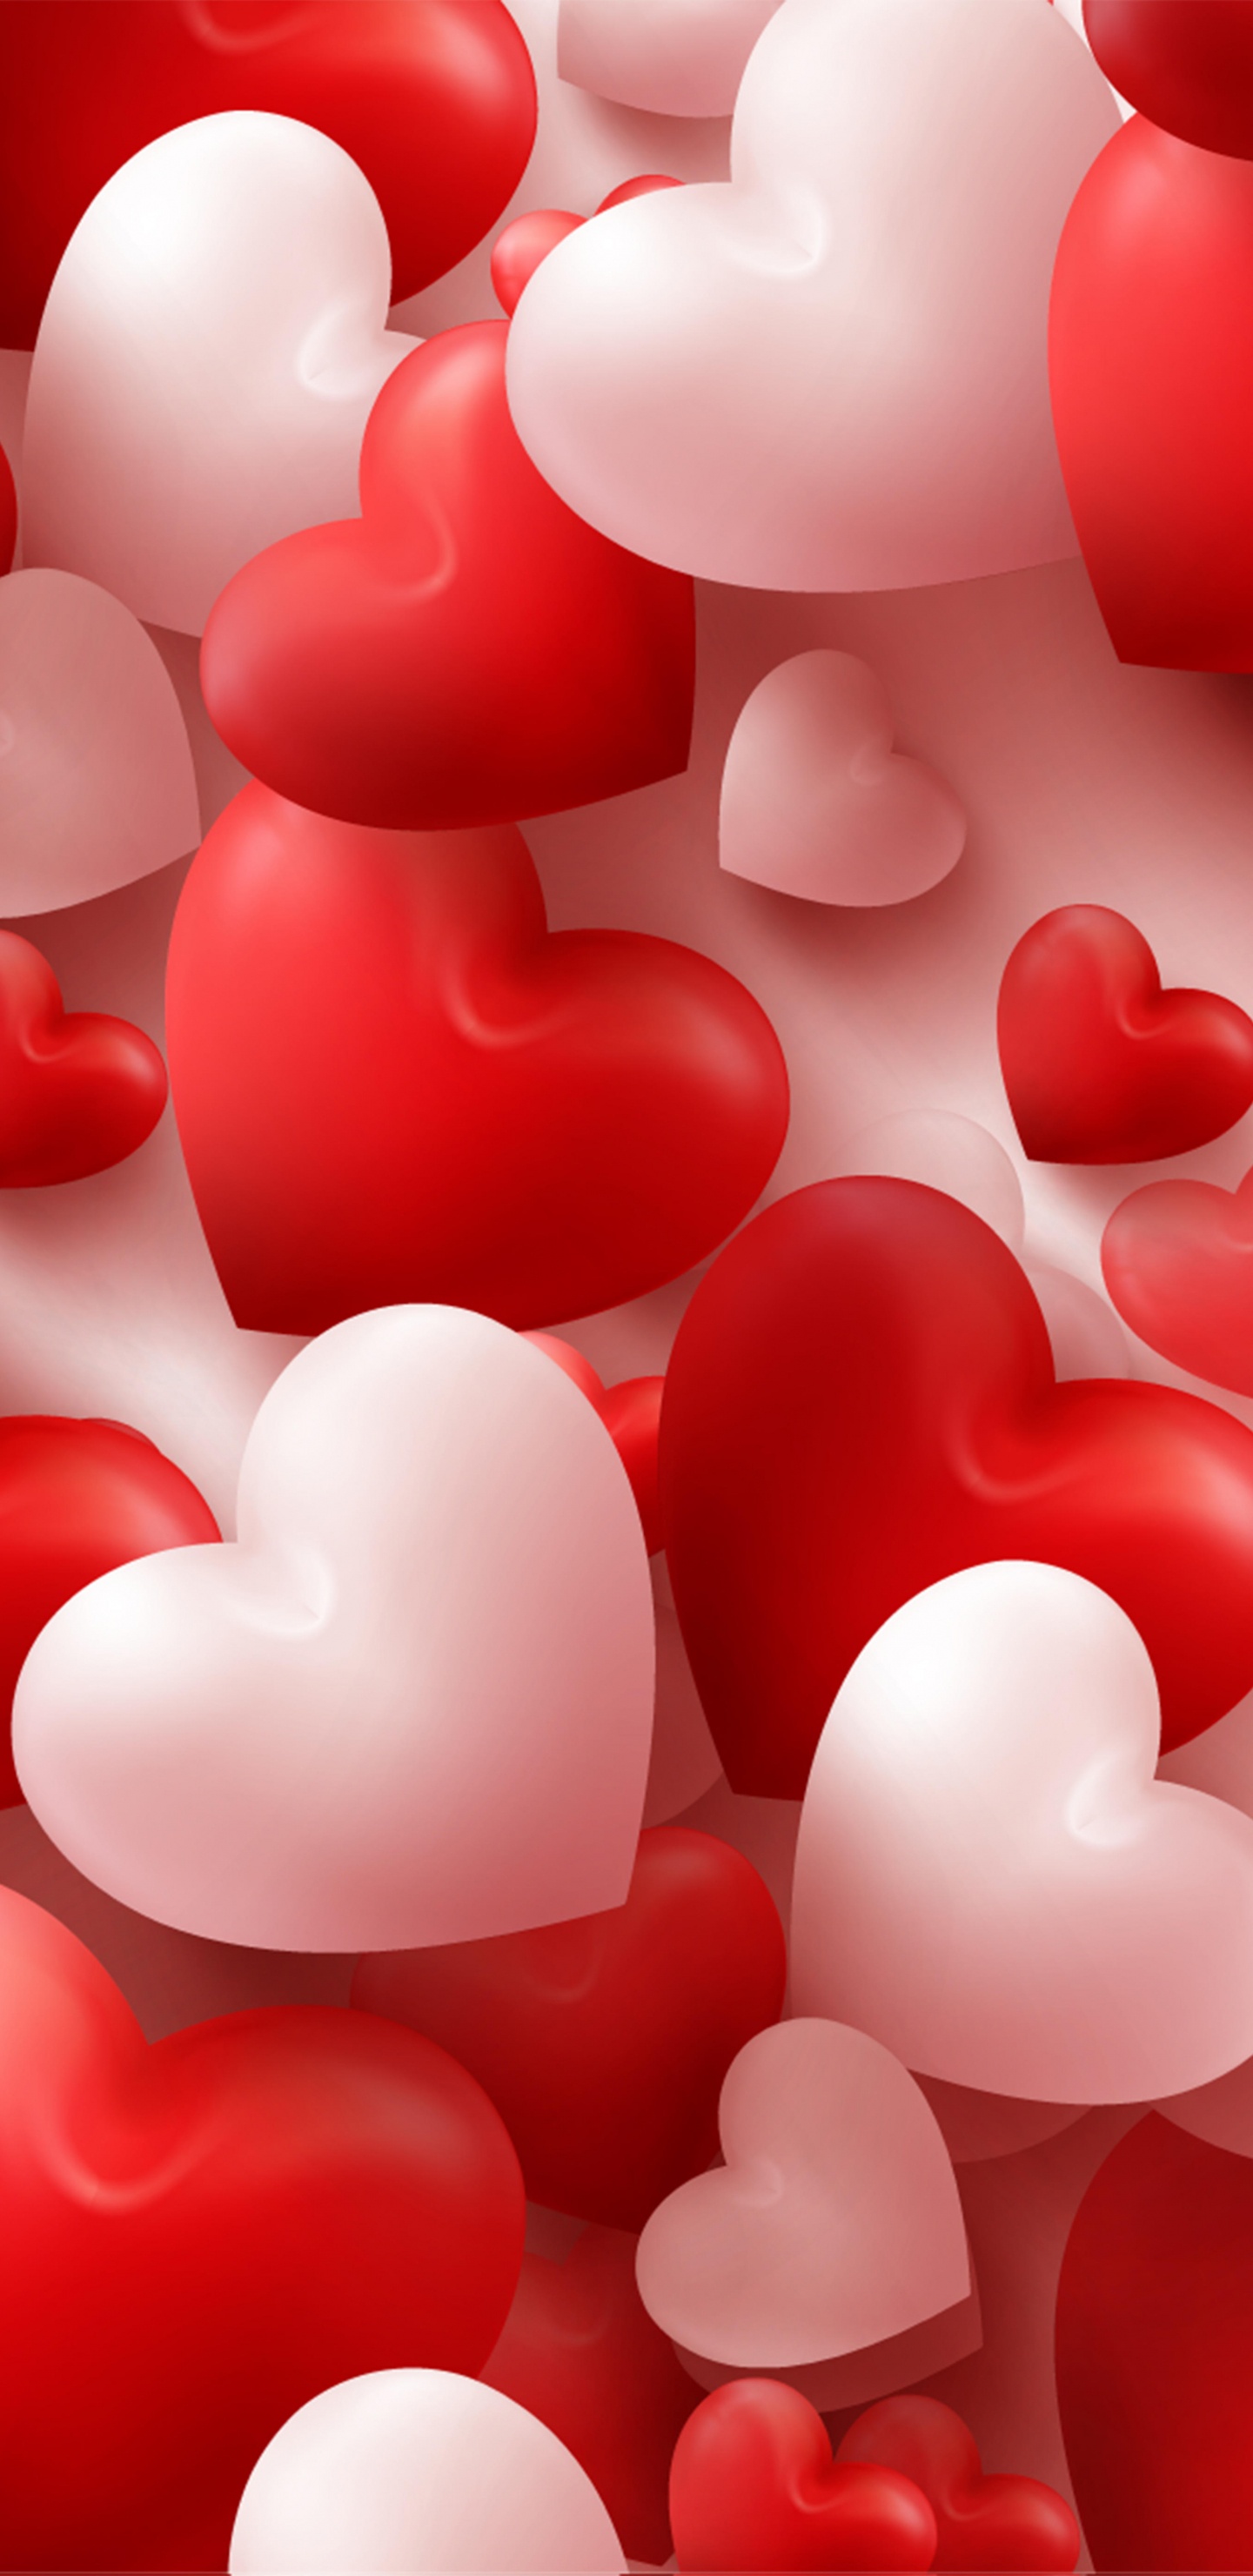 Valentines Day, Heart, Red, Love, Pink. Wallpaper in 1440x2960 Resolution